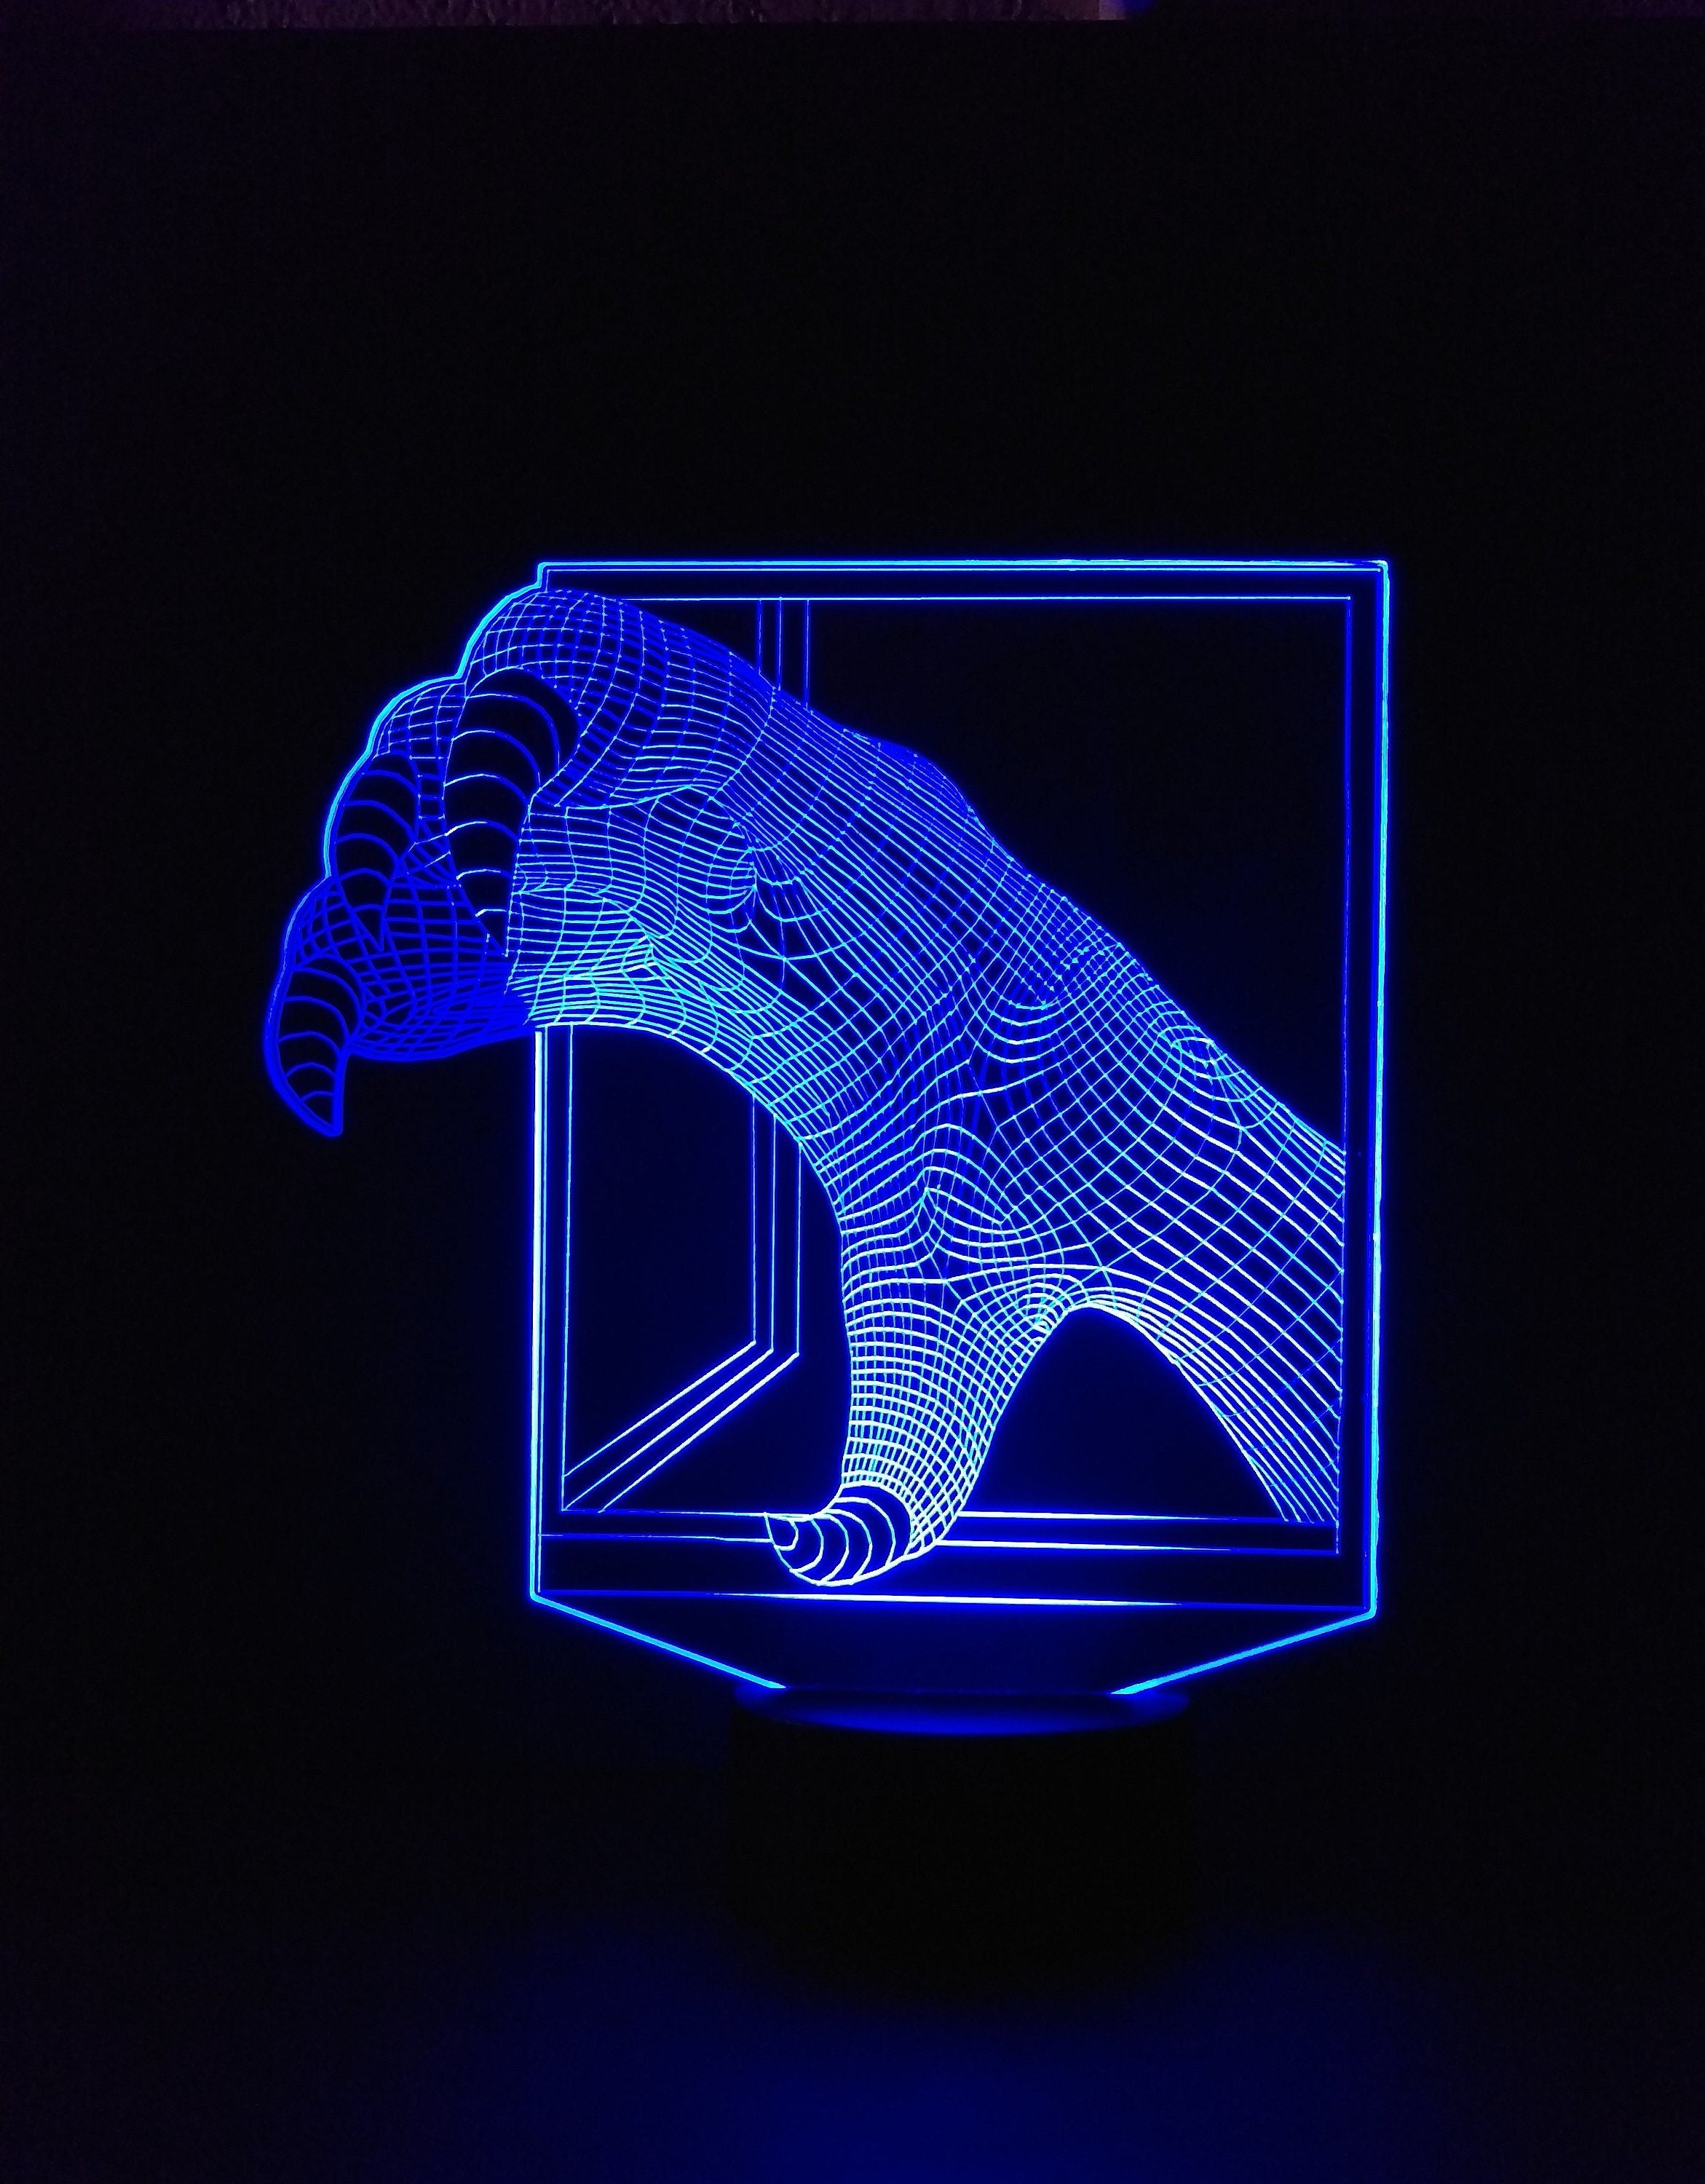 Awesome "Alien Hand" 3D LED lamp (2532) - FREE SHIPPING!